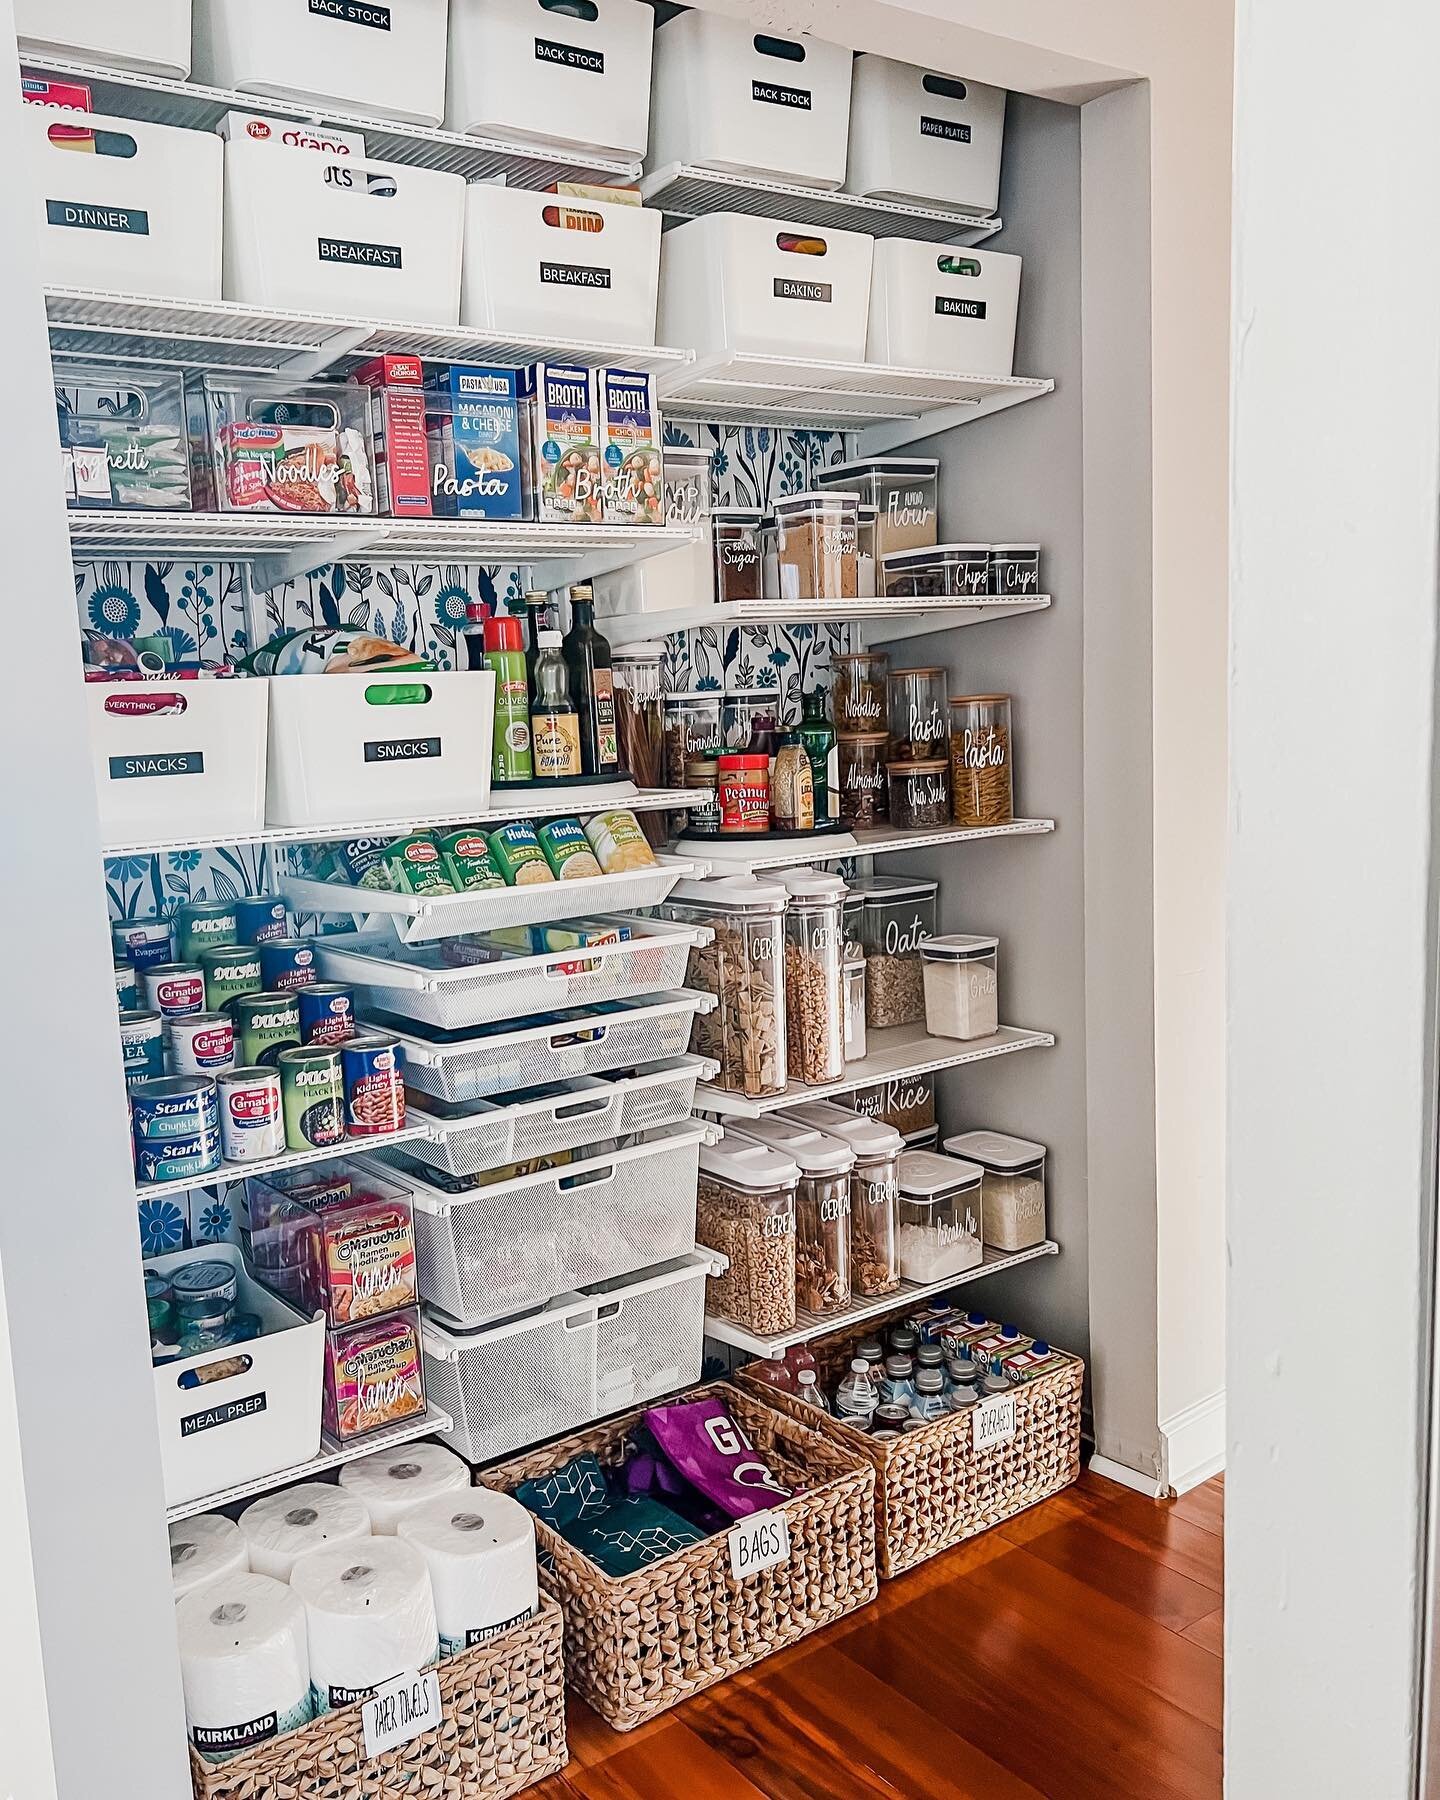 There&rsquo;s no better feeling than reaching into my pantry and finding what I need within seconds! 
⠀⠀⠀⠀⠀⠀⠀⠀⠀
It was not always like that&hellip;
⠀⠀⠀⠀⠀⠀⠀⠀⠀
For a long time I felt emotionally stressed trying to find things in an overstuffed pantry &